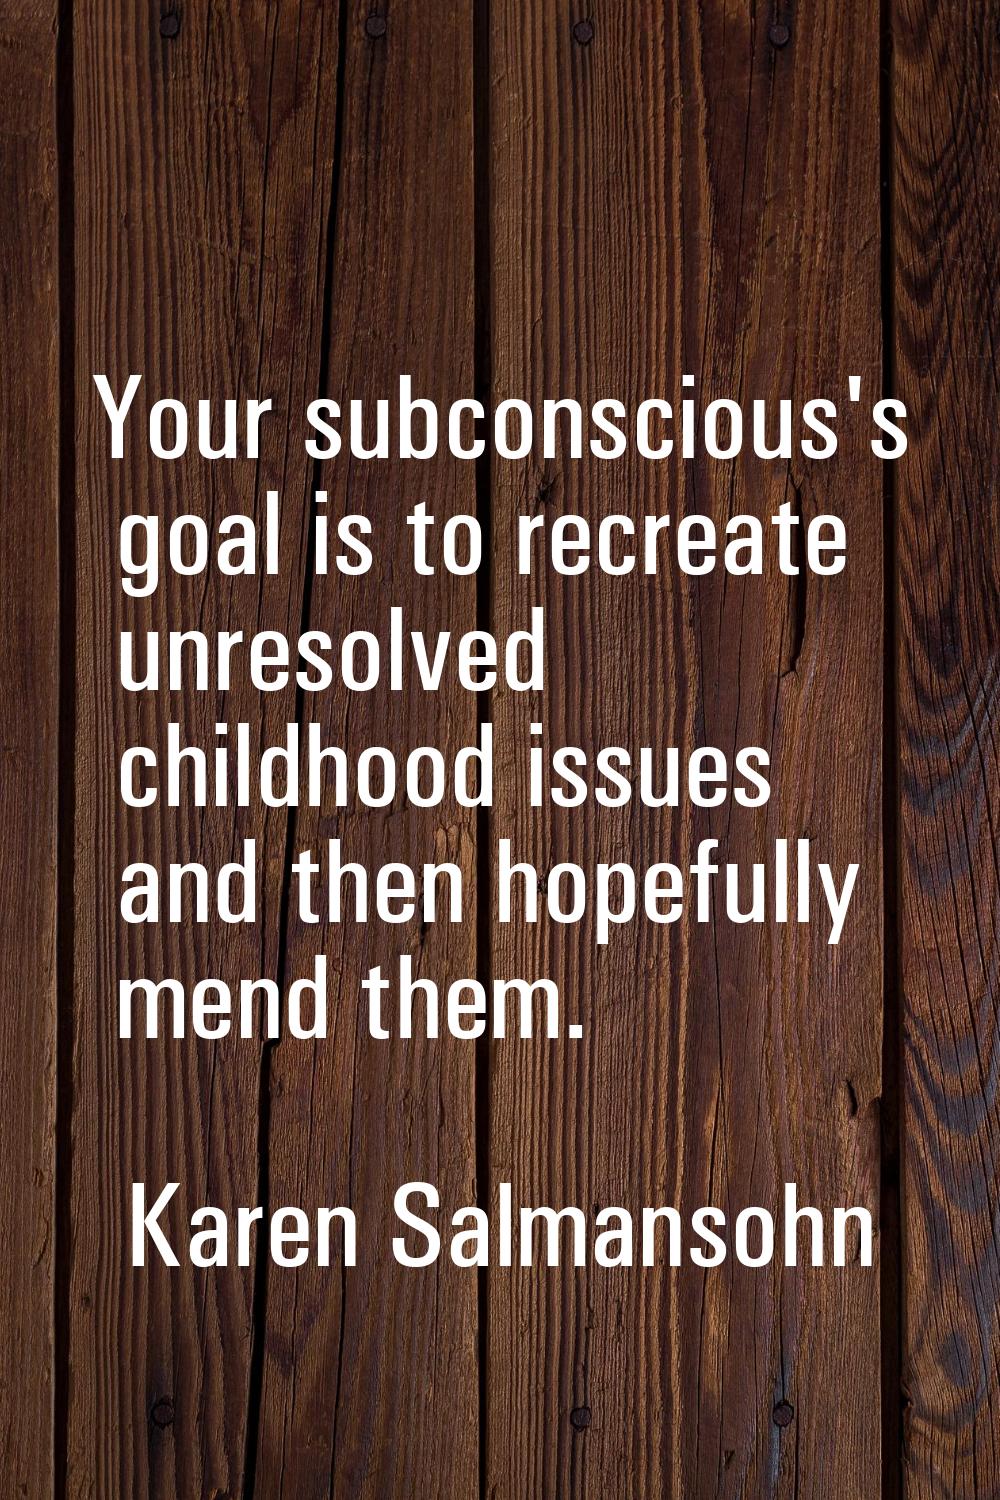 Your subconscious's goal is to recreate unresolved childhood issues and then hopefully mend them.